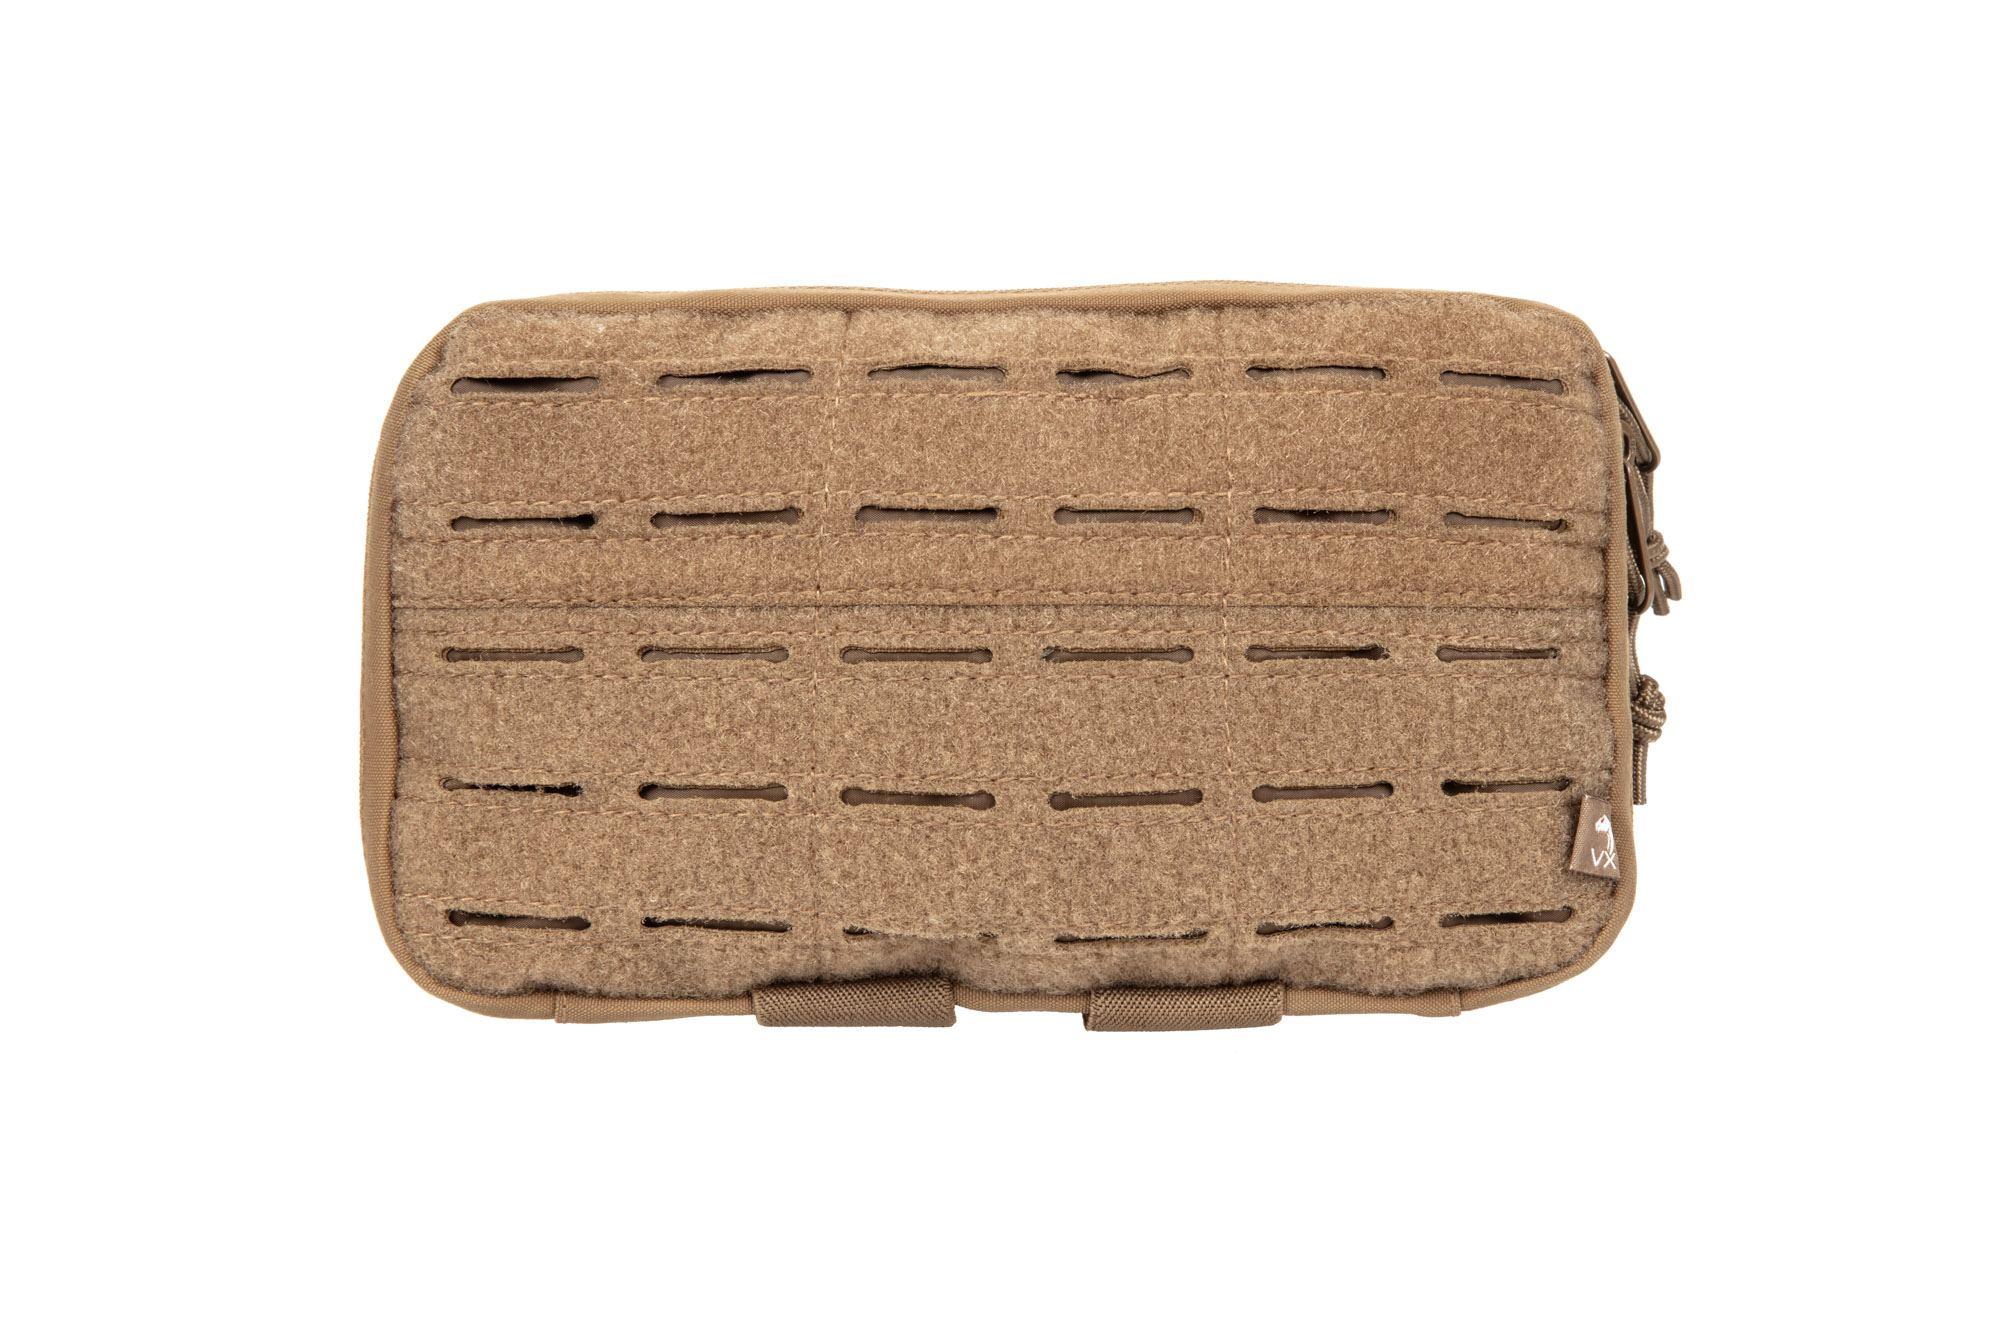 Panel administracyjny Viper Tactical VX Admin Pouch - Coyote